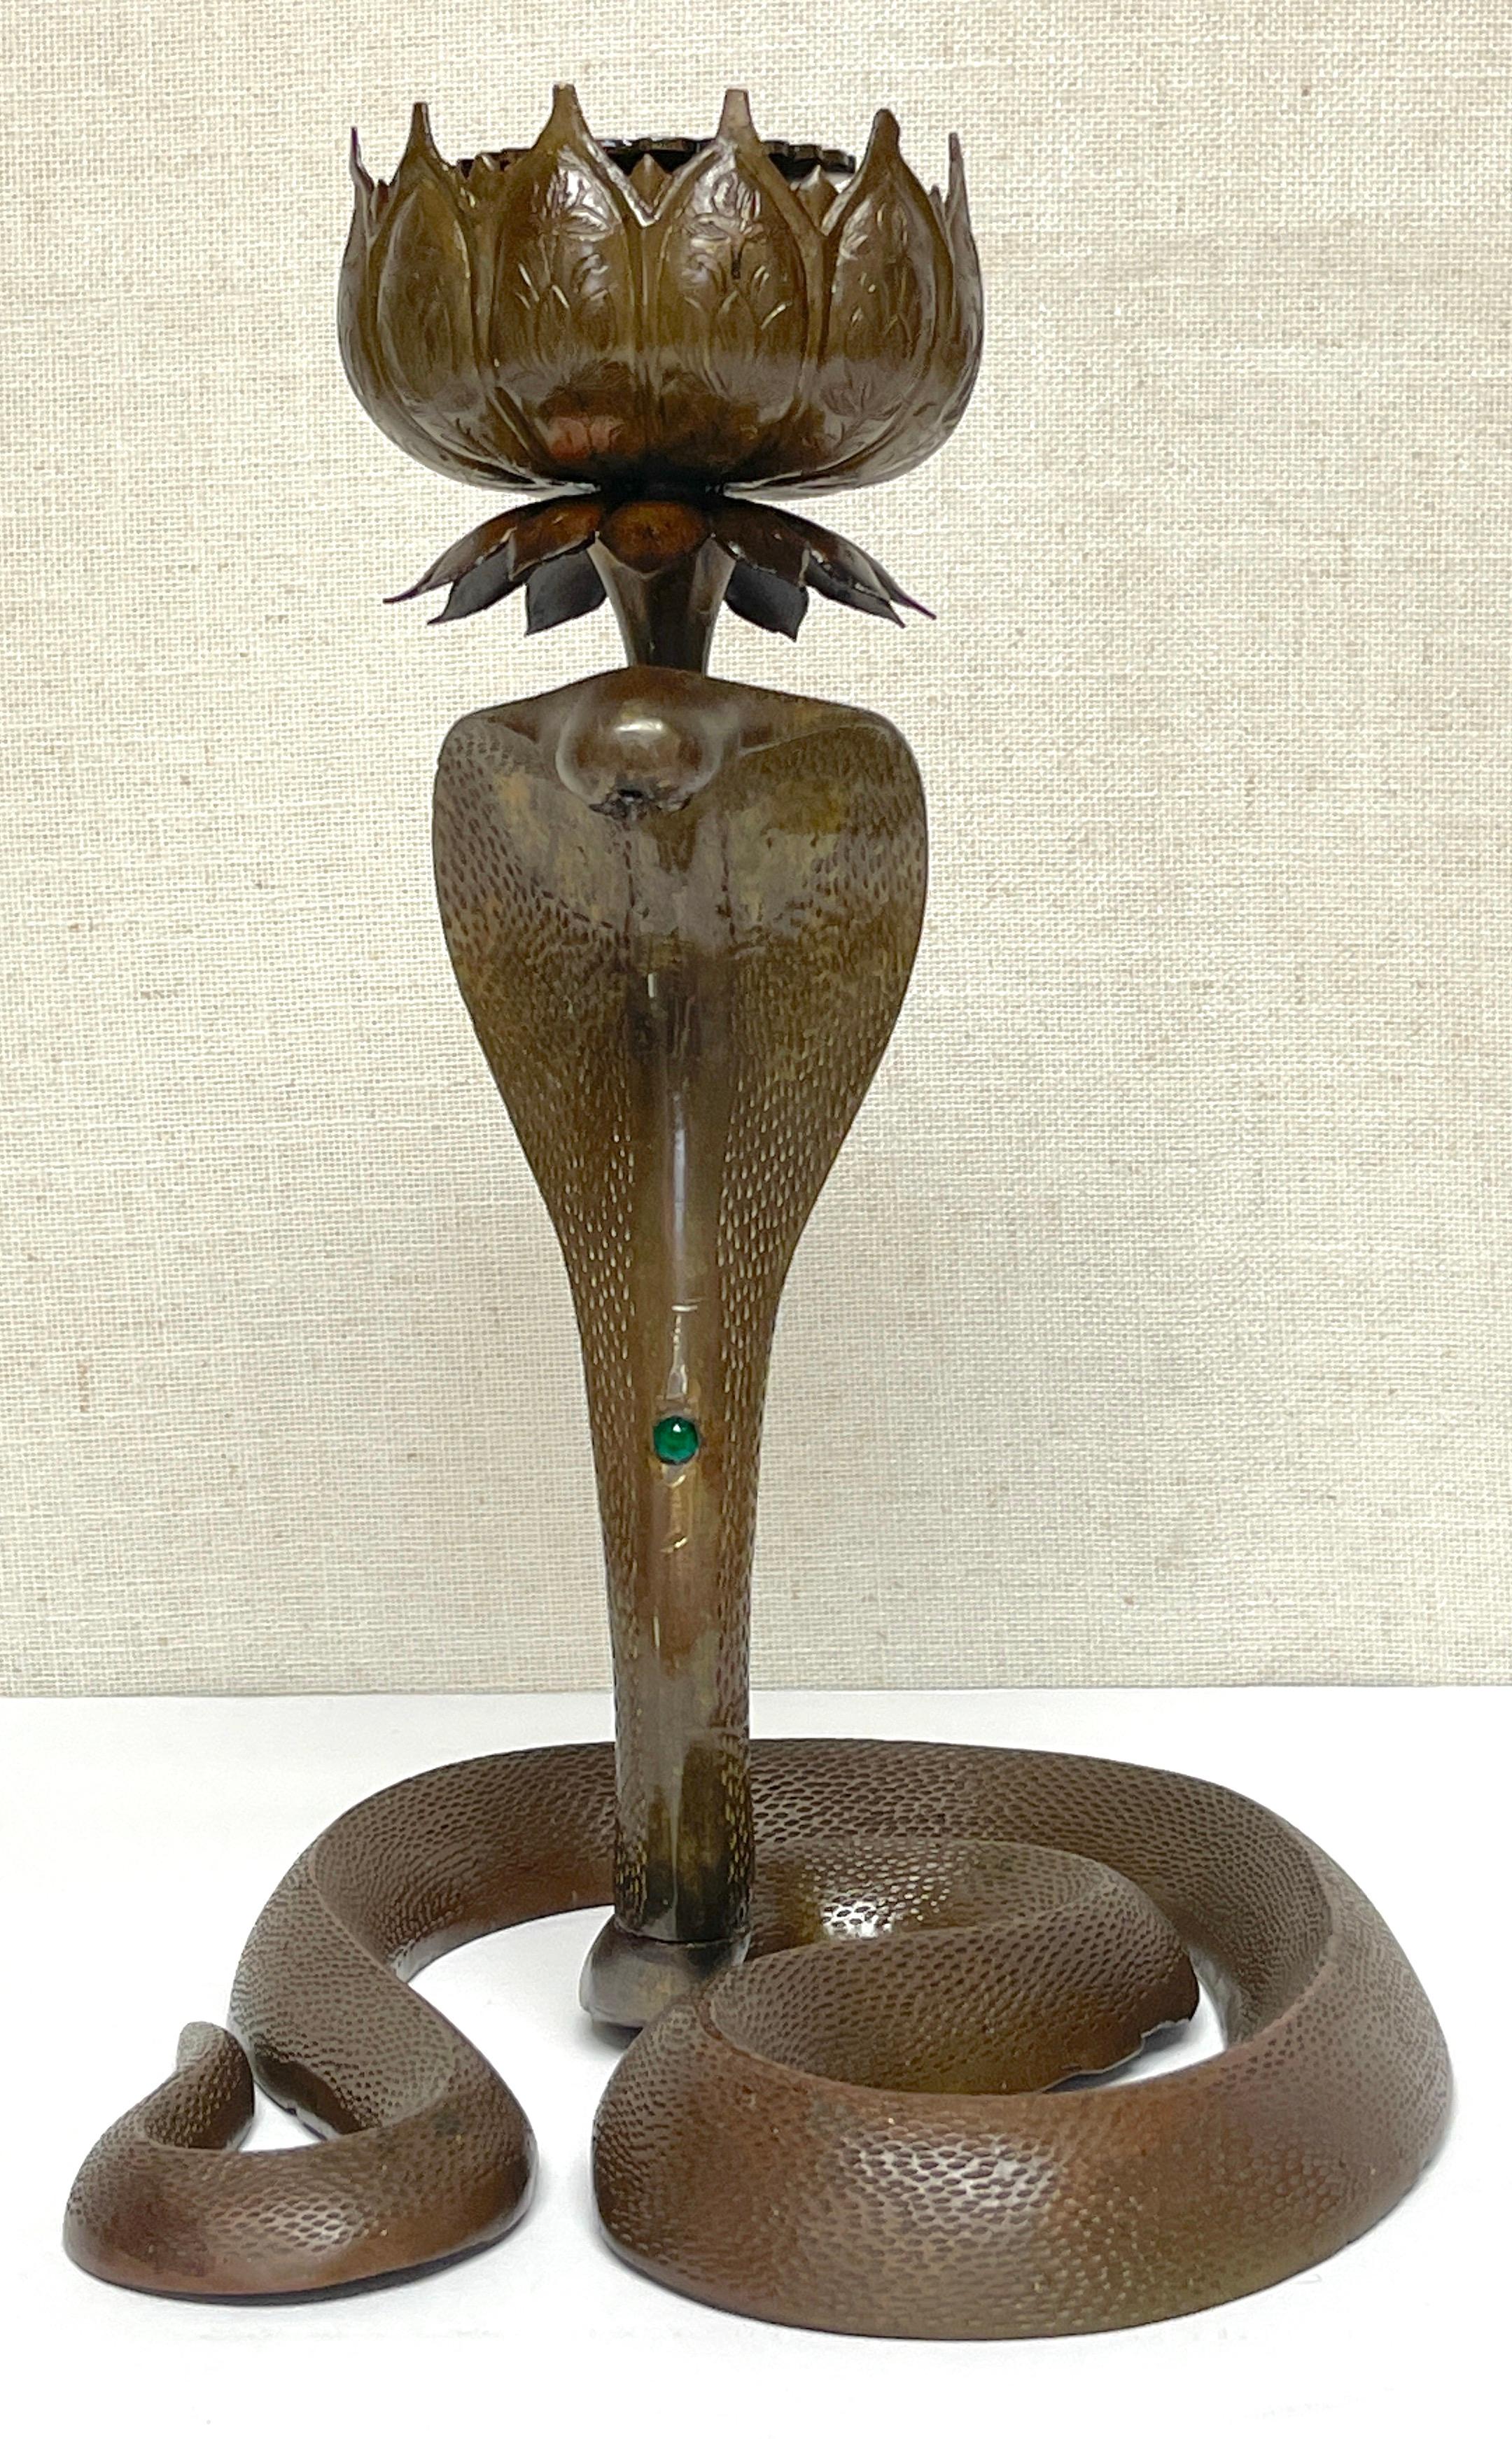 19th Century Anglo- Indian Engraved & Jeweled Bronze Cobra Candlestick 
India, Circa 1890

One the finest examples of late 19th century Anglo- Indian bronze cobra candlesticks, made for the British market. The quality of the craftsmanship of the